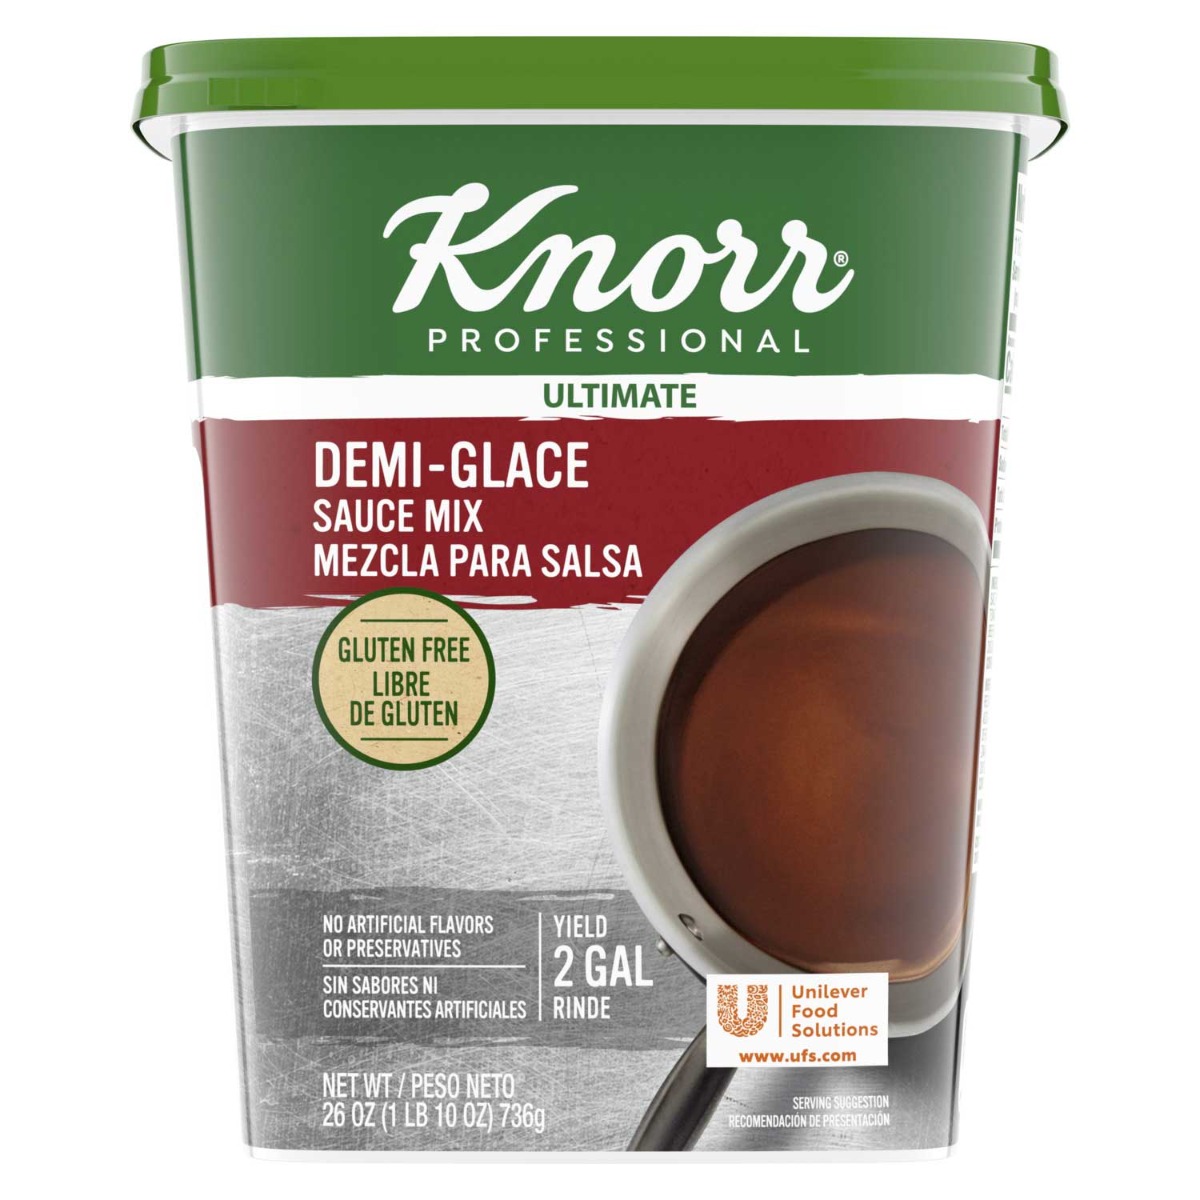 Knorr Professional Ultimate Demi-Glace Sauce Mix, 26 ounce -- 4 per case